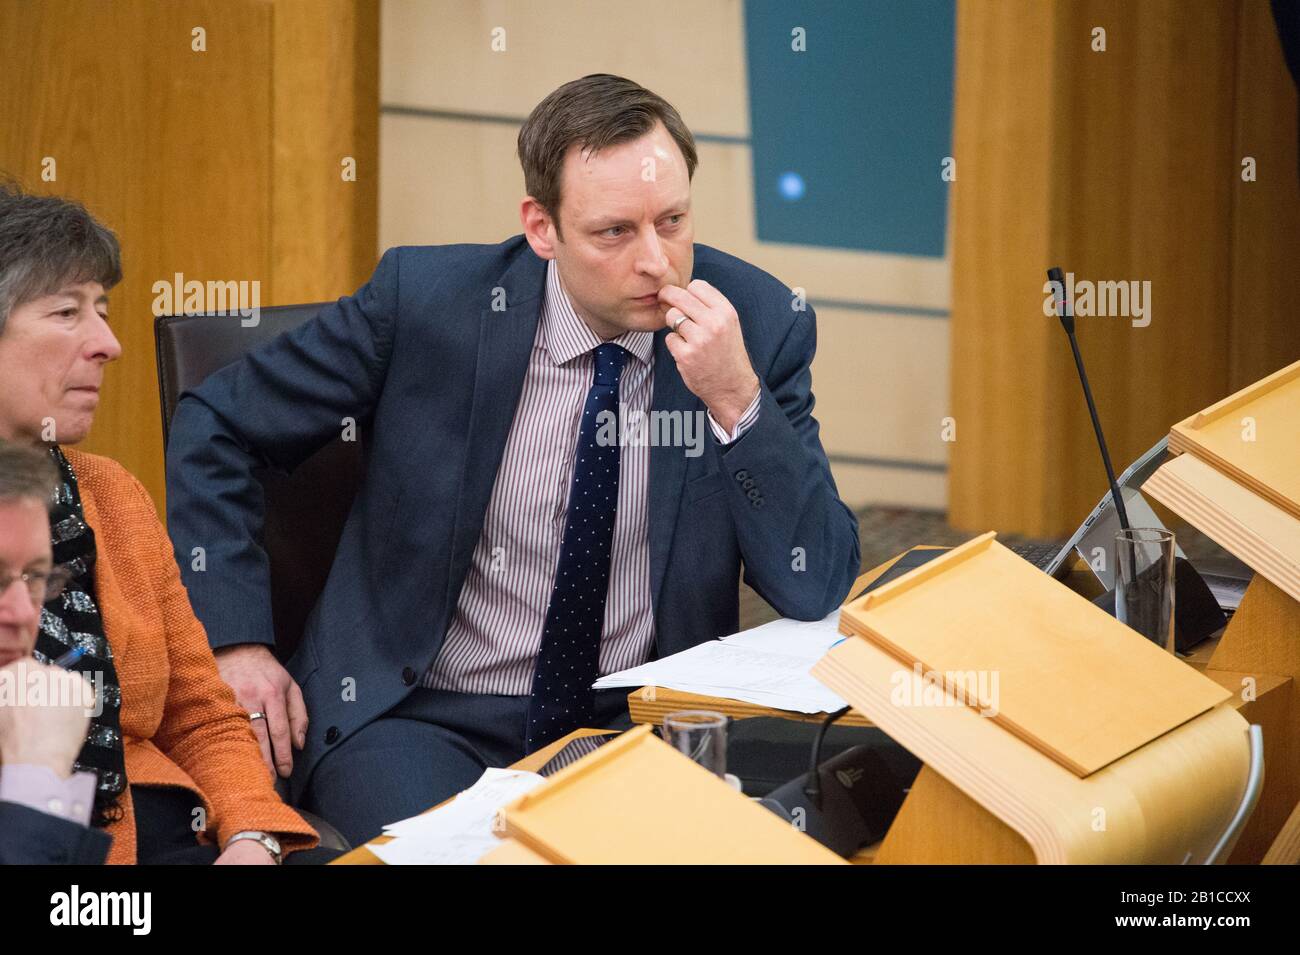 Edinburgh, UK. 20 February 2020.   Pictured: Liam Kerr MSP - Deputy Leader of, the Scottish Conservative and Unionist Party and Shadow Cabinet Secretary for Justice.  Scenes from inside the debating chamber of the Scottish Parliament in Holyrood, Edinburgh. Stock Photo